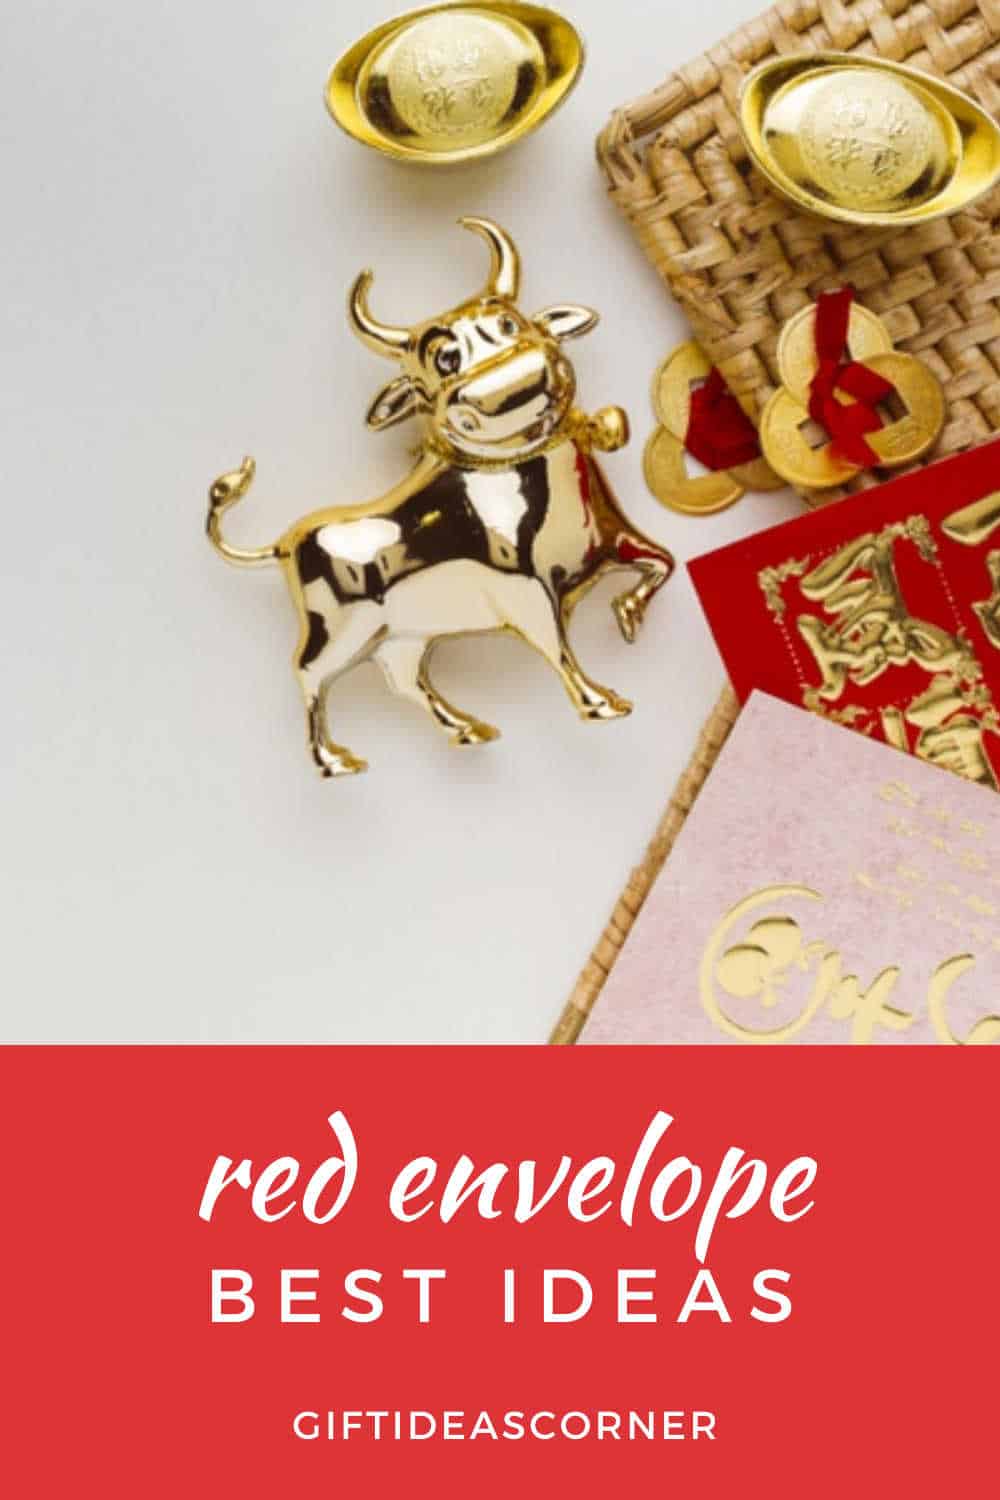 red envelope gifts 2